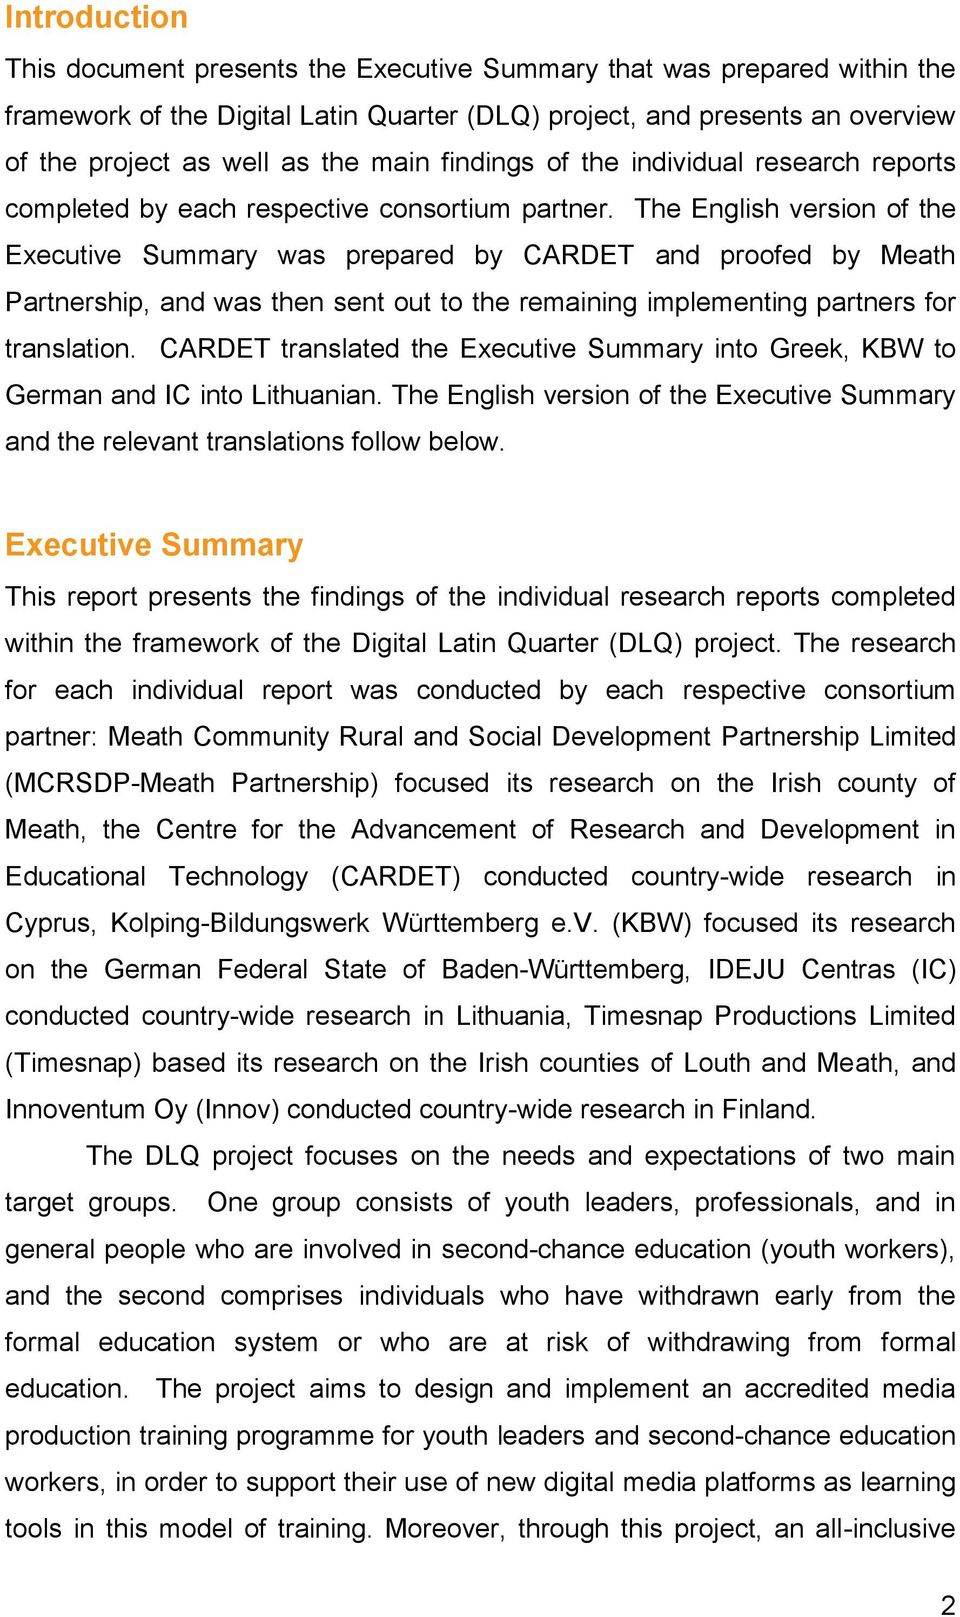 The English version of the Executive Summary was prepared by CARDET and proofed by Meath Partnership, and was then sent out to the remaining implementing partners for translation.